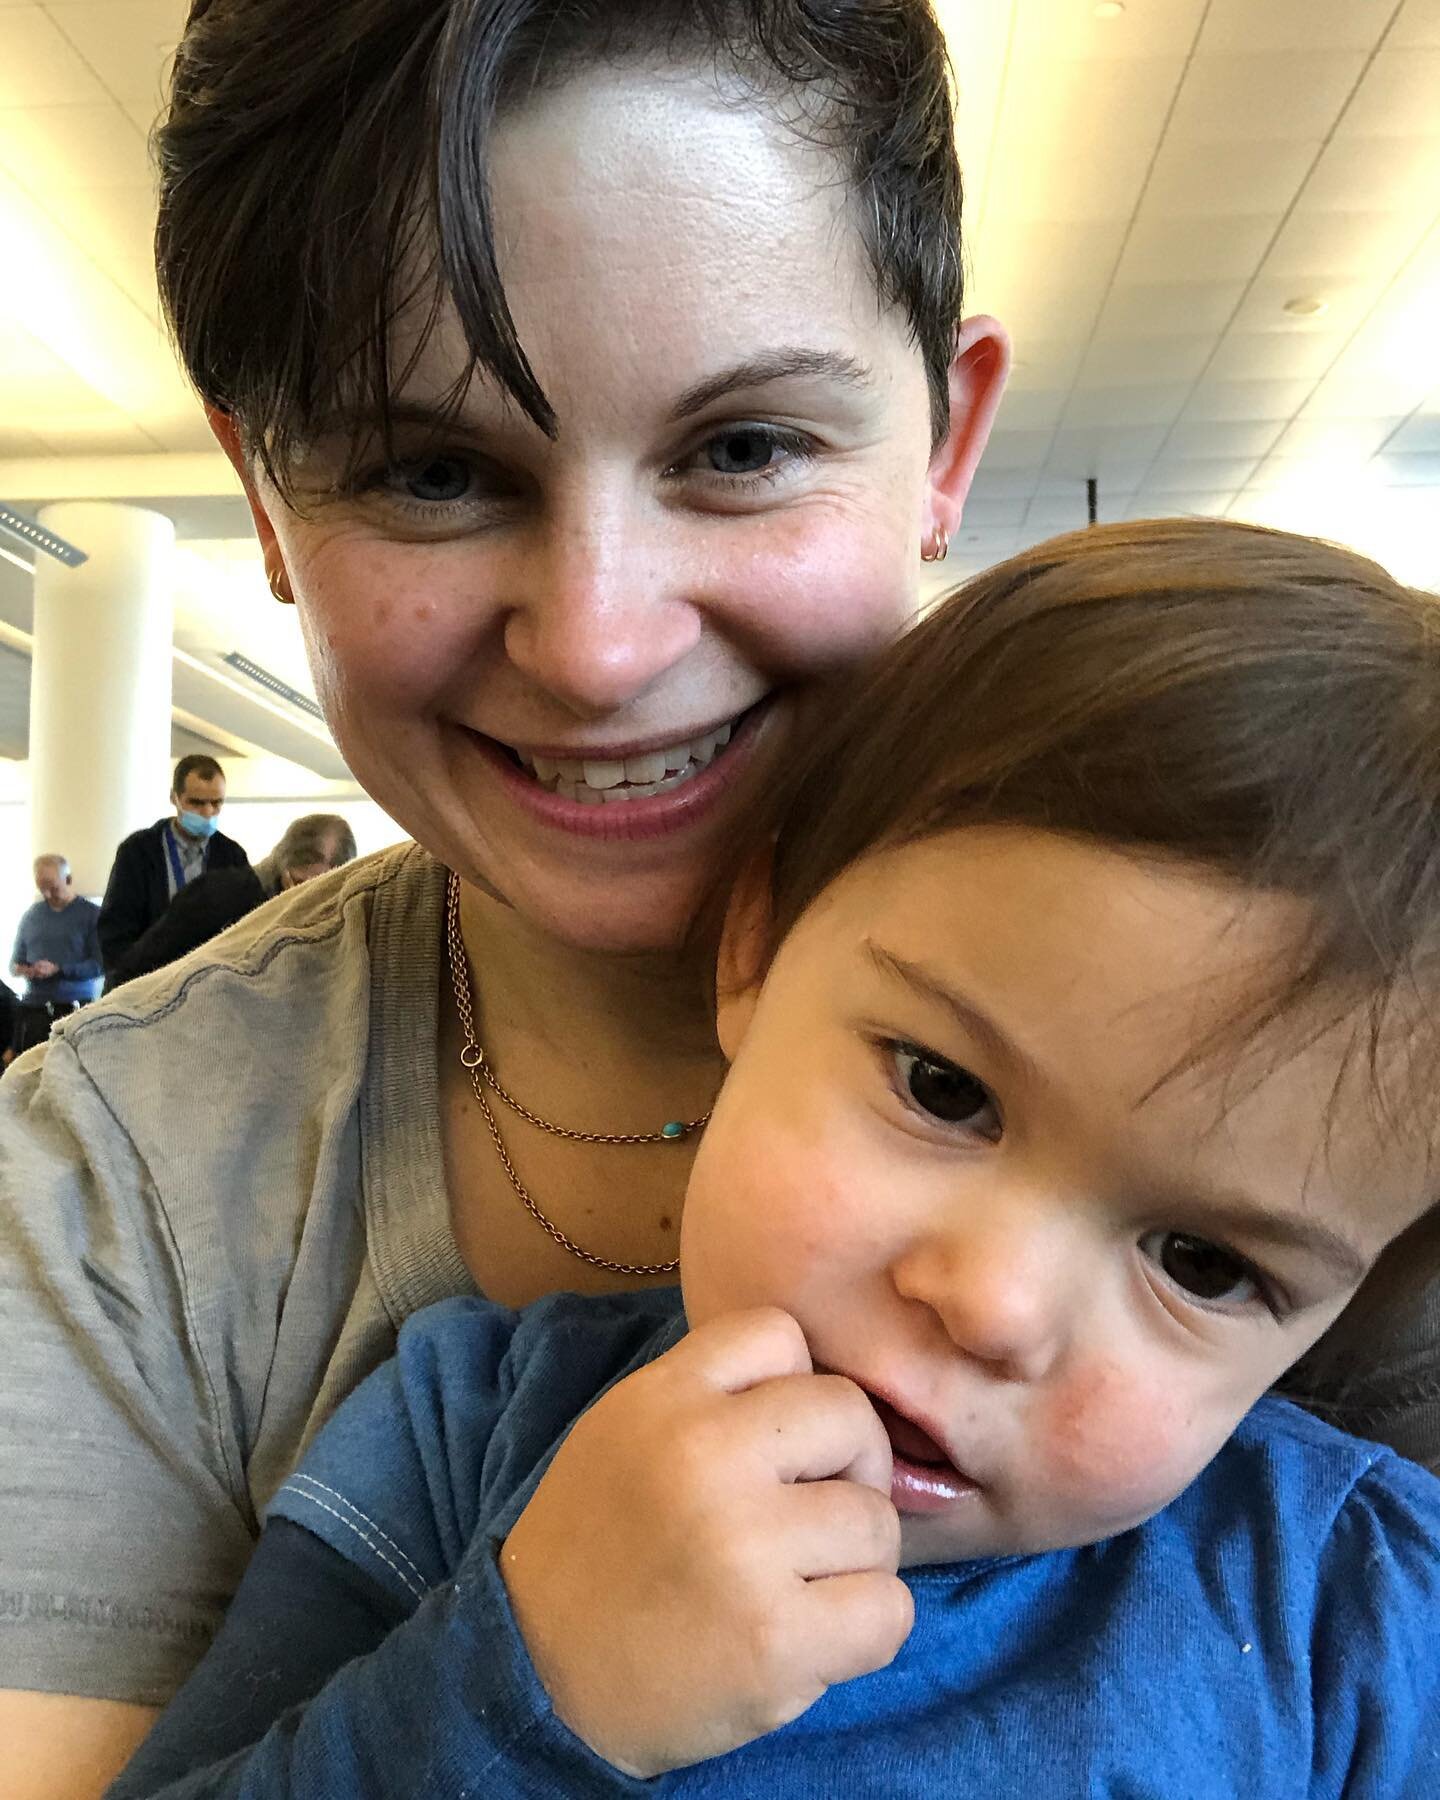 Finally made a trip out to Whidbey Island to see my folks. So good to smell the ocean and share my childhood beach with our daughter, Magdalena. 

1. Selfie with Maggie at the airport 
2. First time pre-boarding. (Maggie did great on the flight.)
3. 